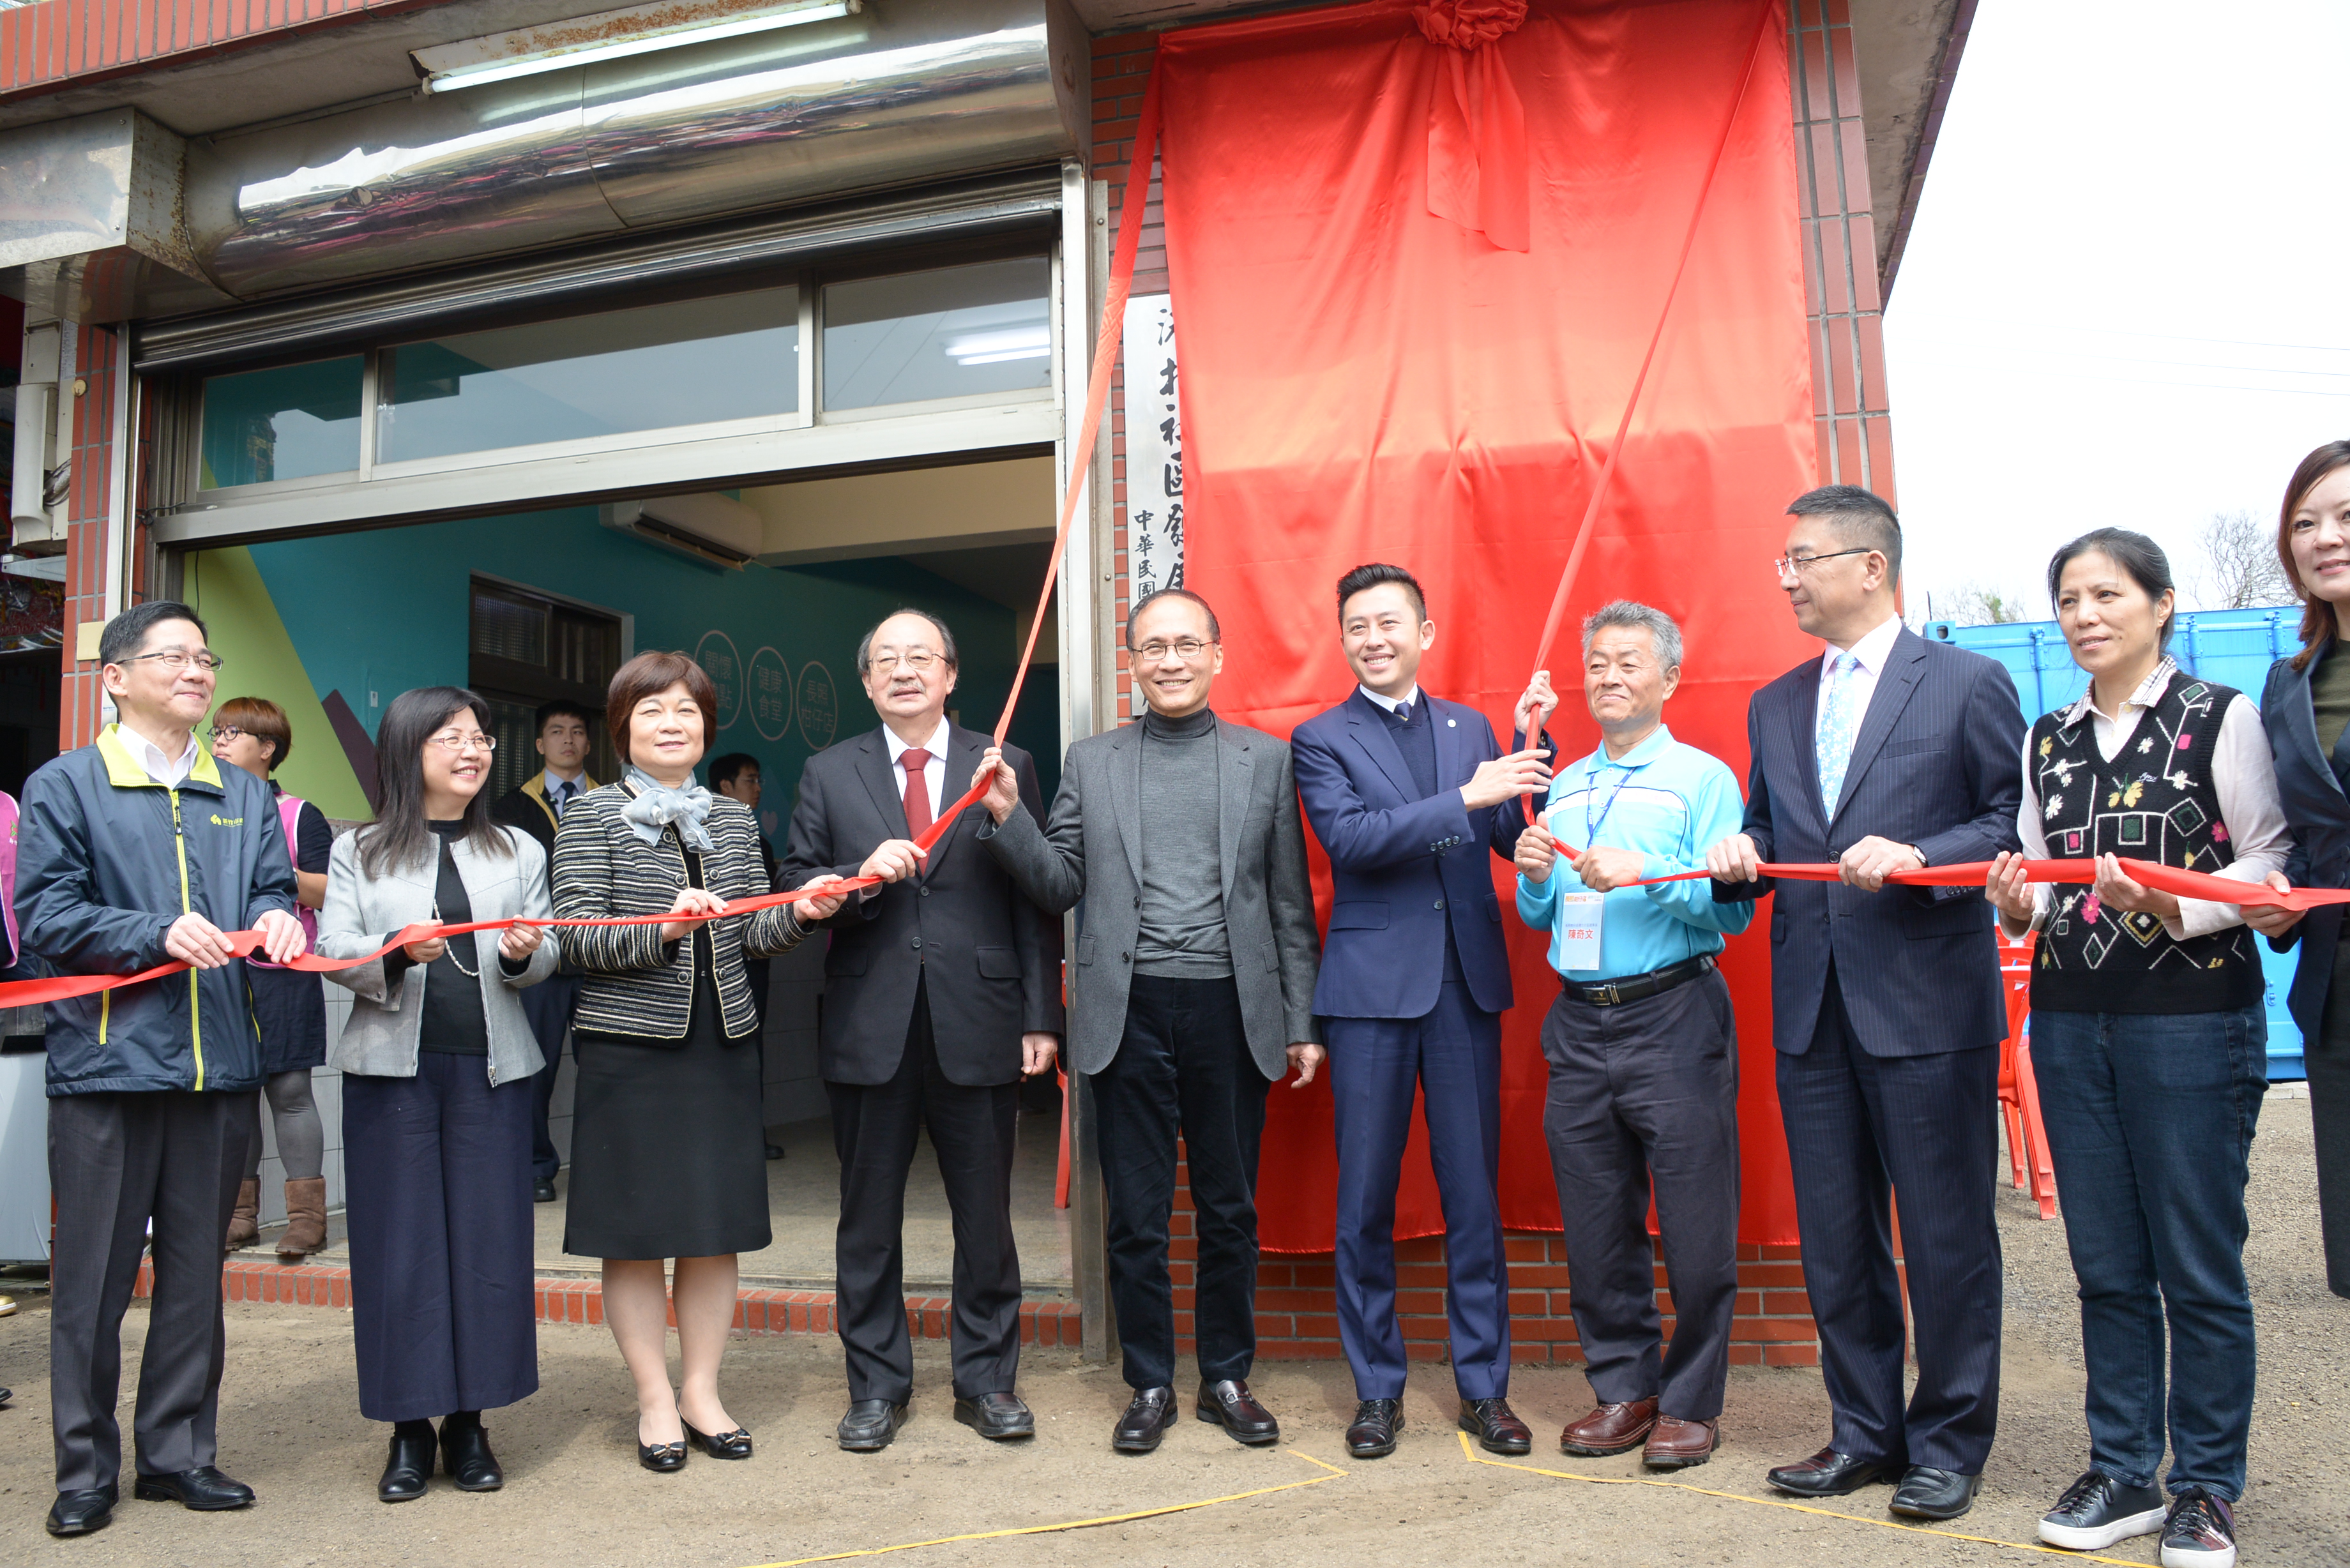 Premier Lin attends opening of long-term care center in Hsinchu